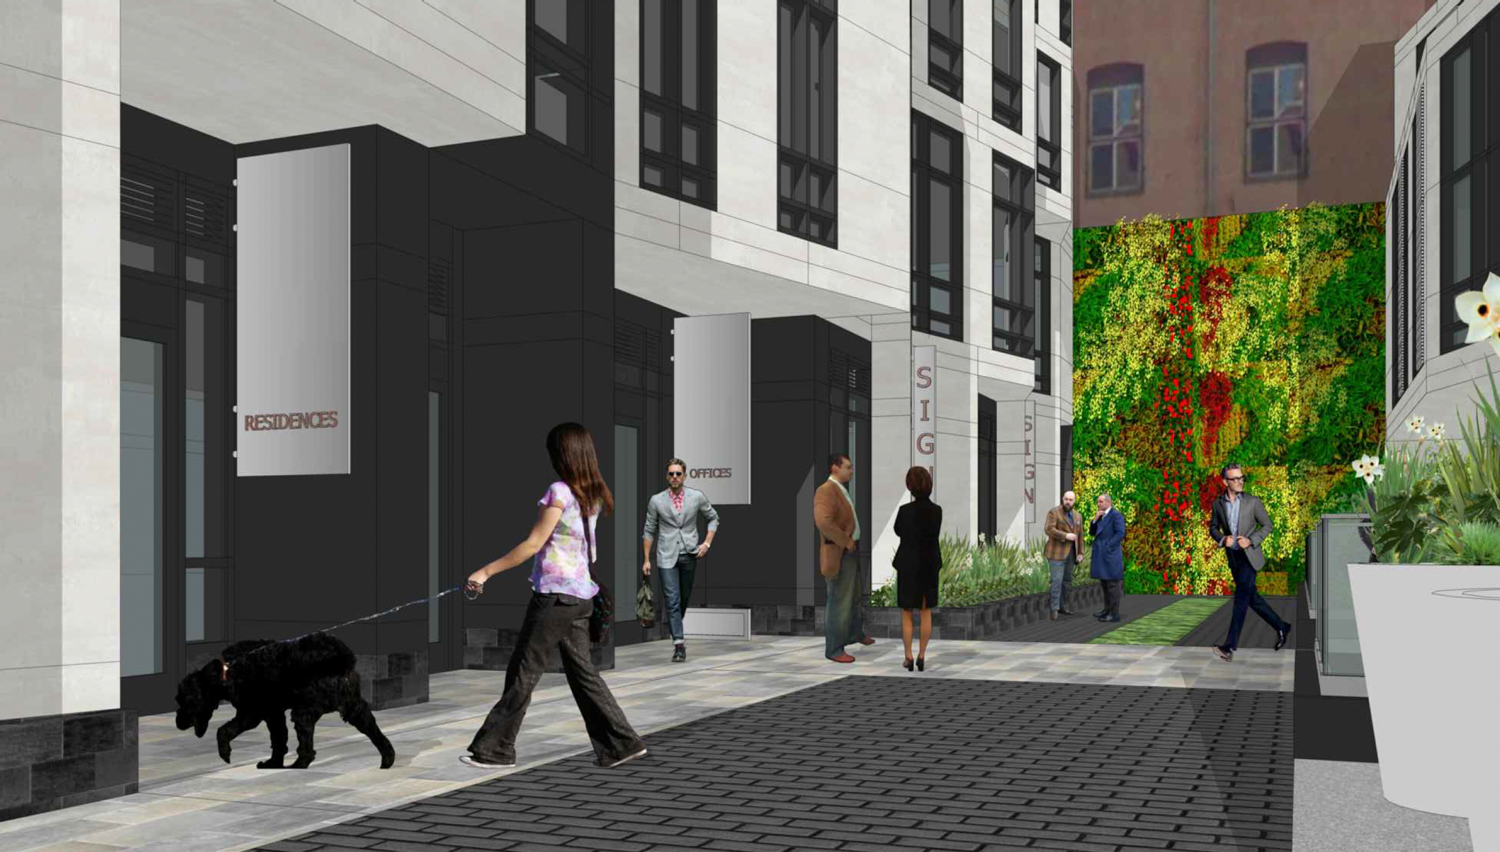 425 Broadway residential and office lobby view with landscaping in Verdi Alley, rendering by Ian Birchall & Associates